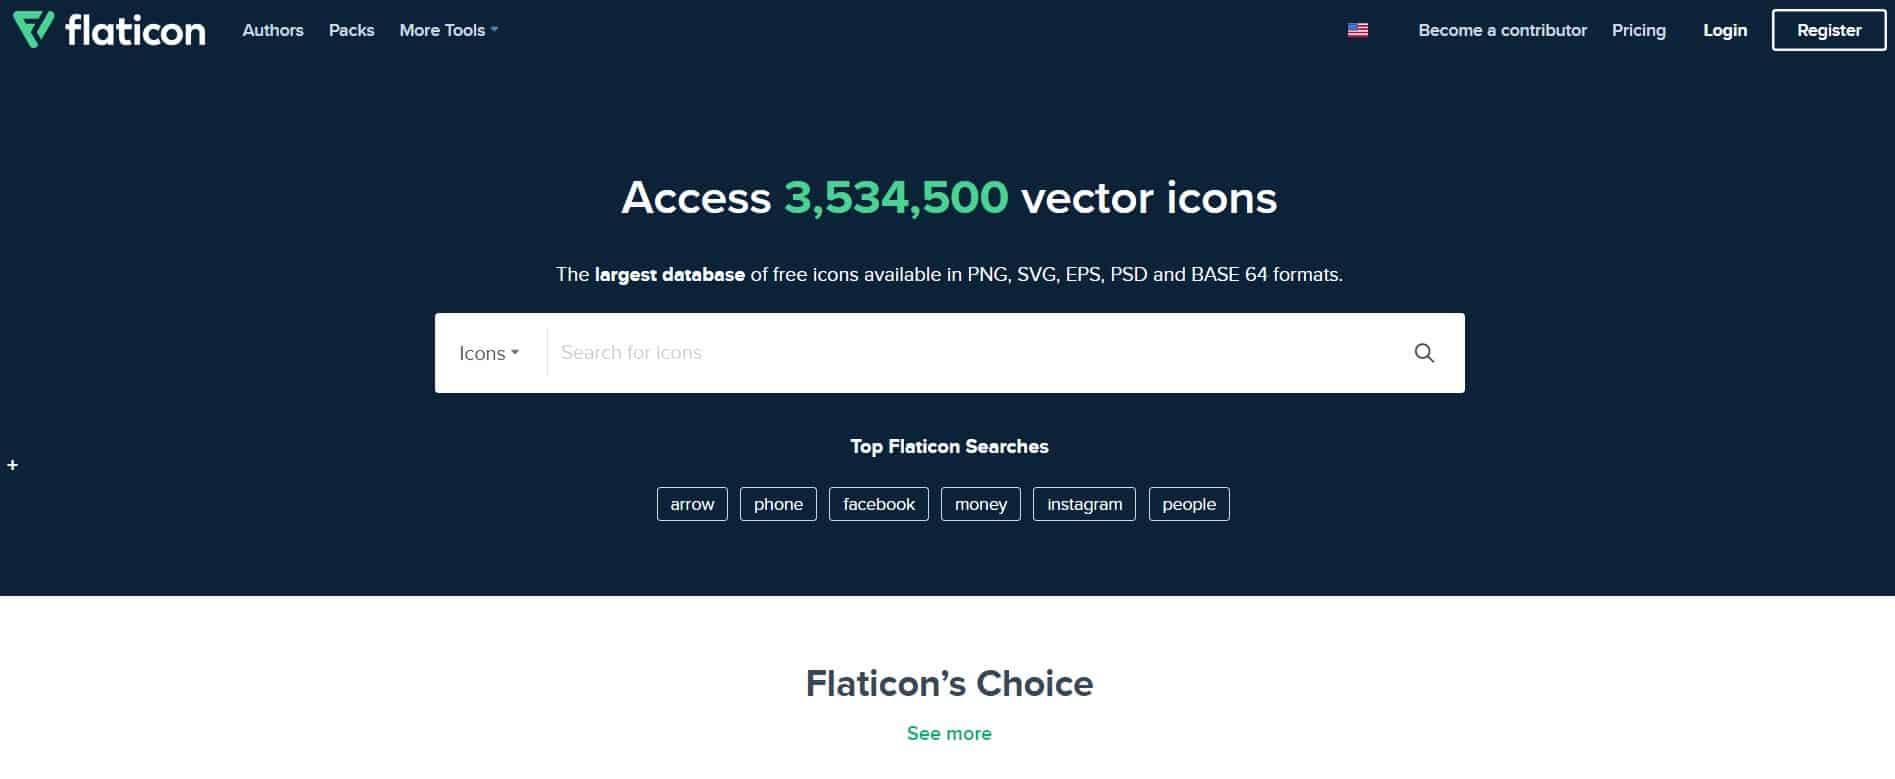 Flaticon: Free vector icons - SVG, PSD, PNG, EPS & Icon Font - Thousands of free icons